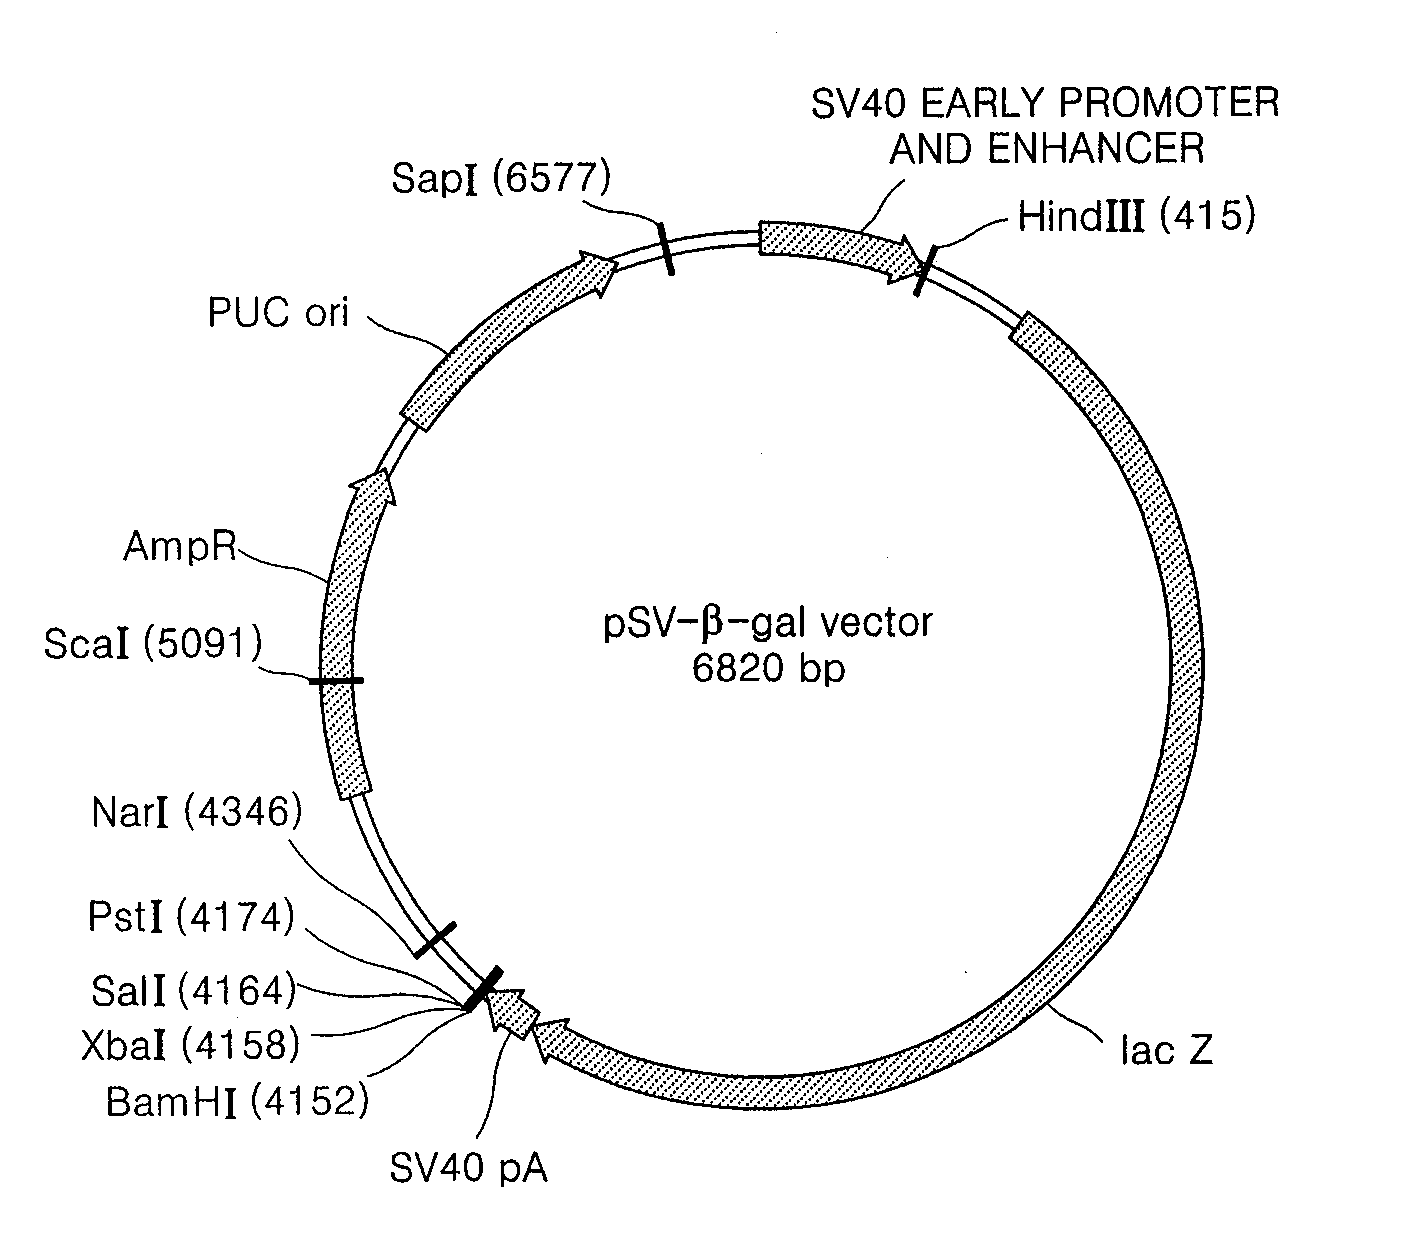 Expression Vector for Animal Cell Comprising at Least One Copy of Mar Dna Sequences at the 3'Terminal of Transcription Termination Region of a Gene and Method for the Expression of Foreign Gene Using the Vector